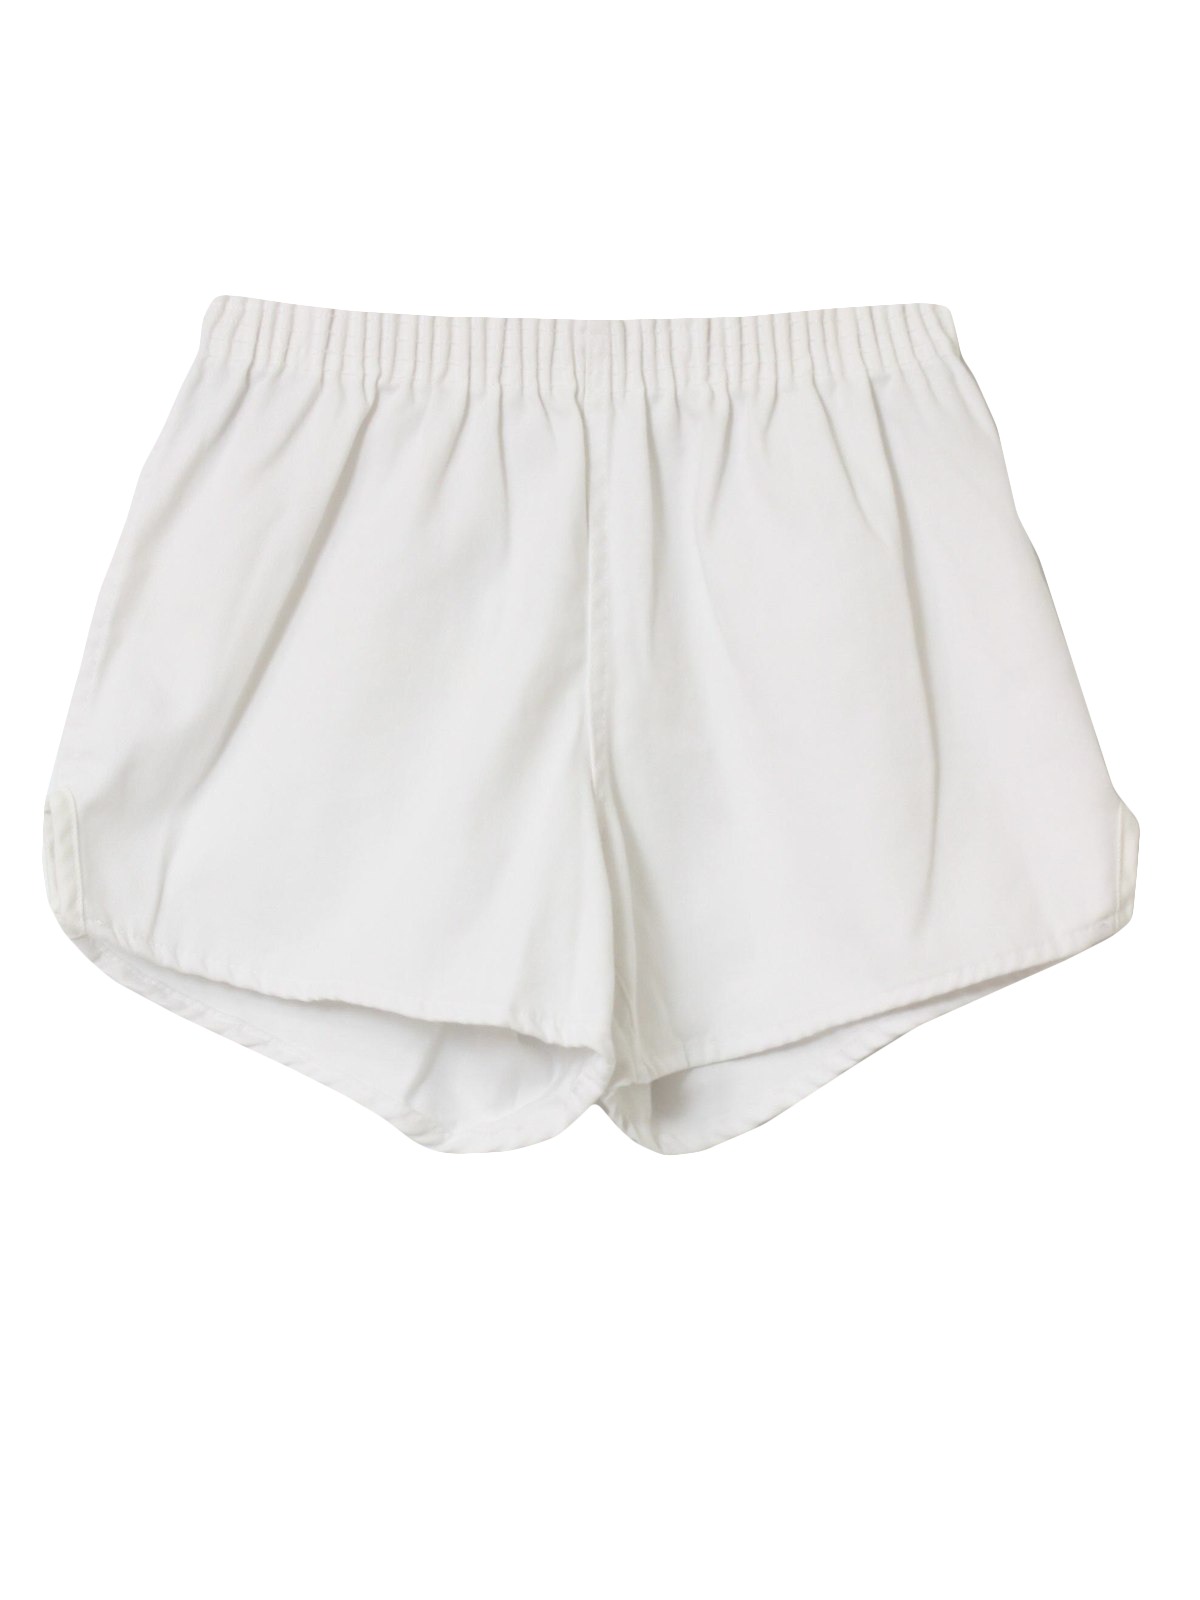 Vintage 80s Shorts: 80s -Soffe- Mens white background polyester and ...